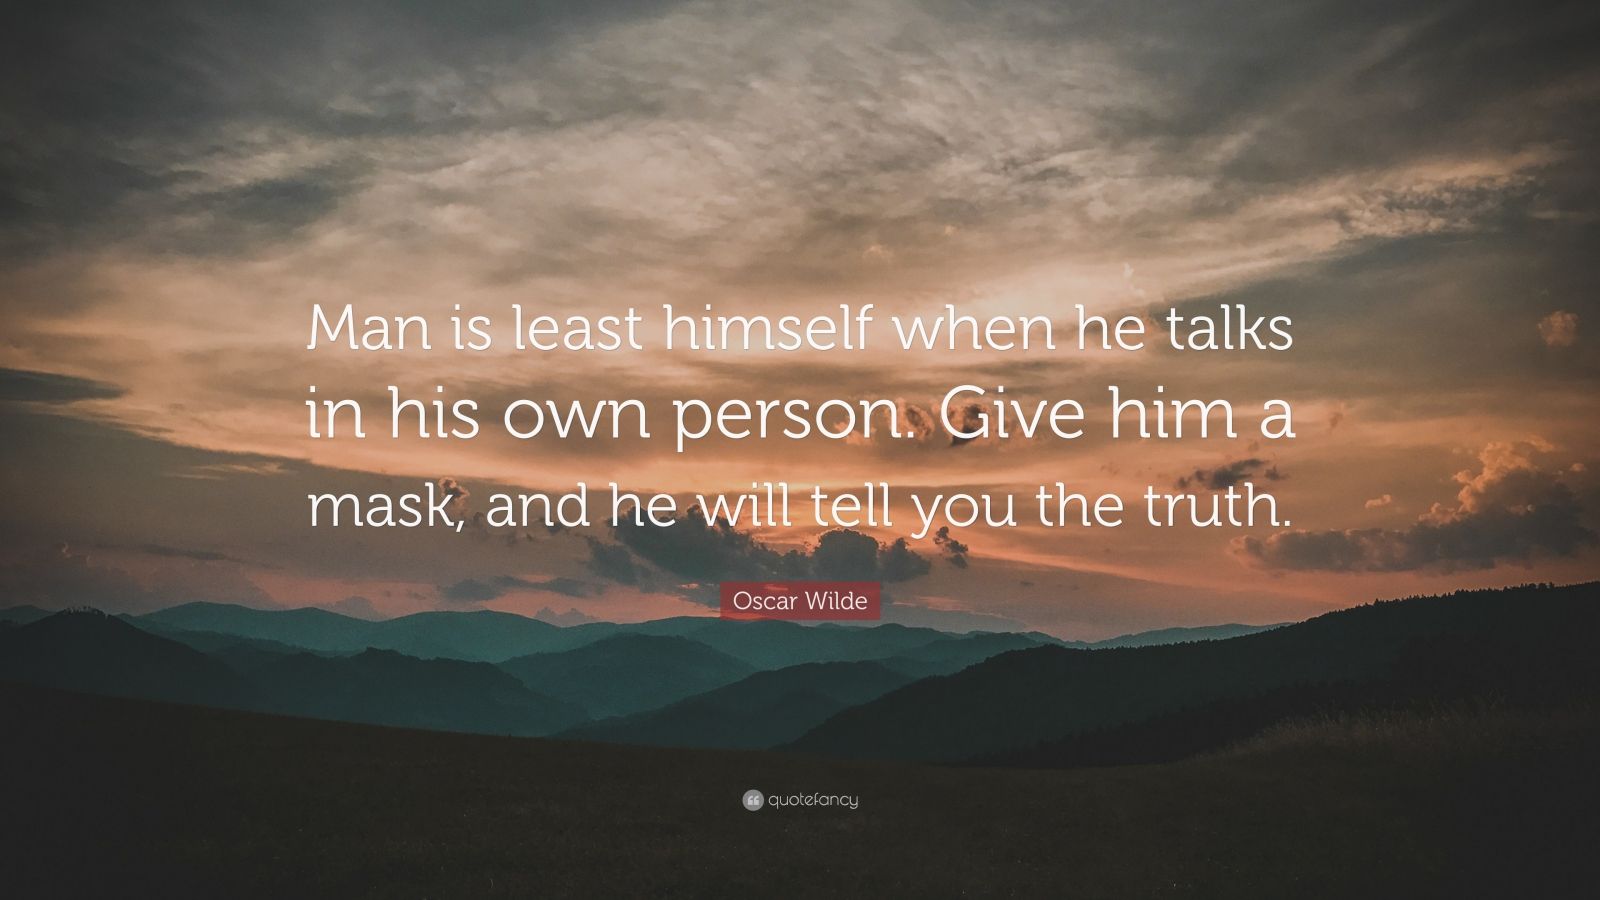 Oscar Wilde Quote: "Man is least himself when he talks in his own person. Give him a mask, and ...